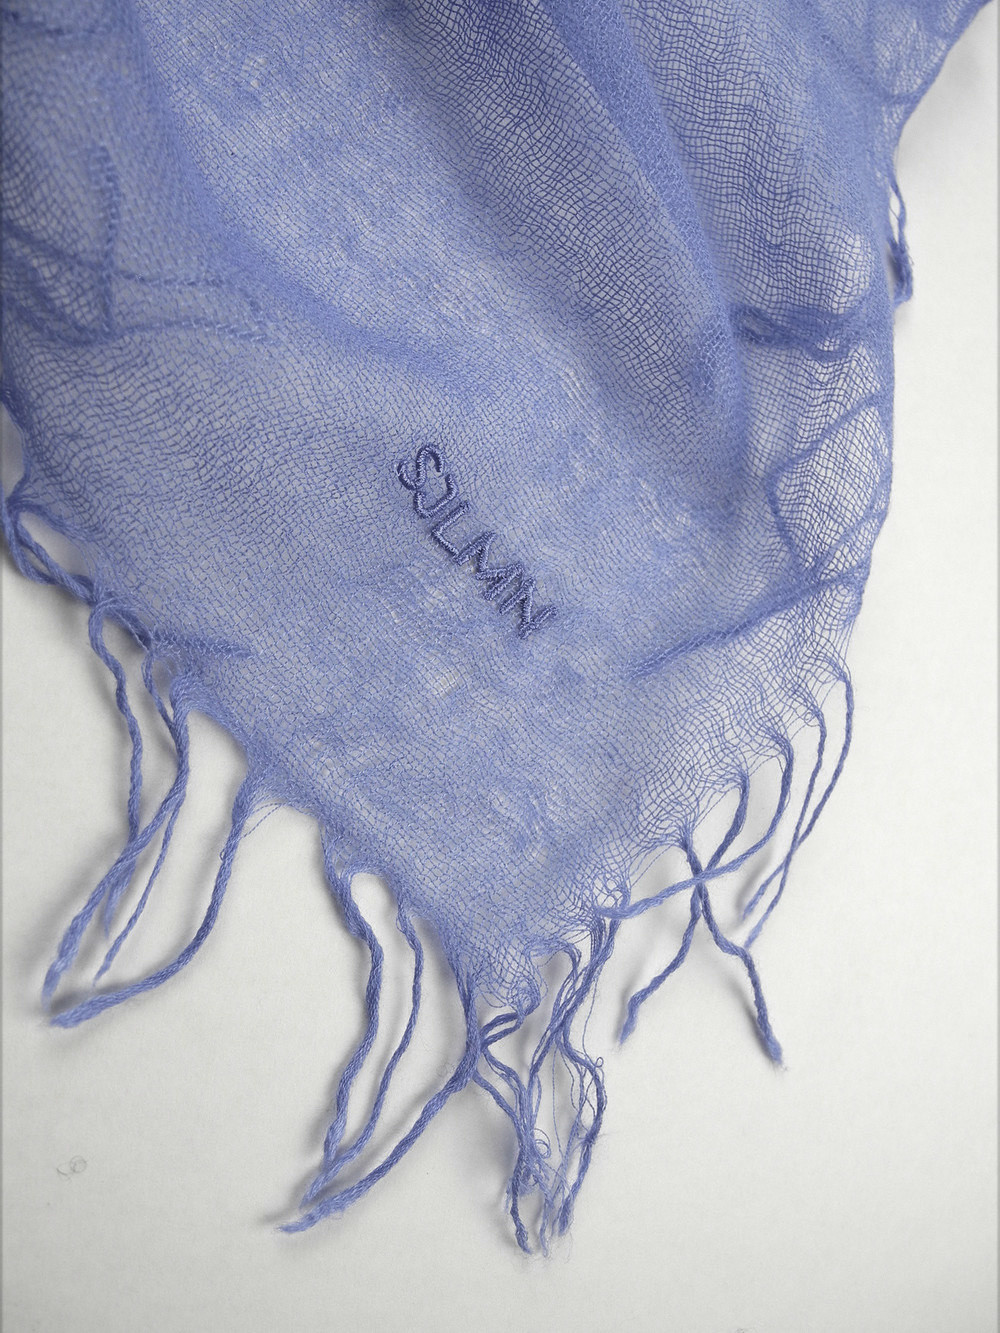 C.O.S.Y by SjaalMania Scarf Cosy Cashmy Provence